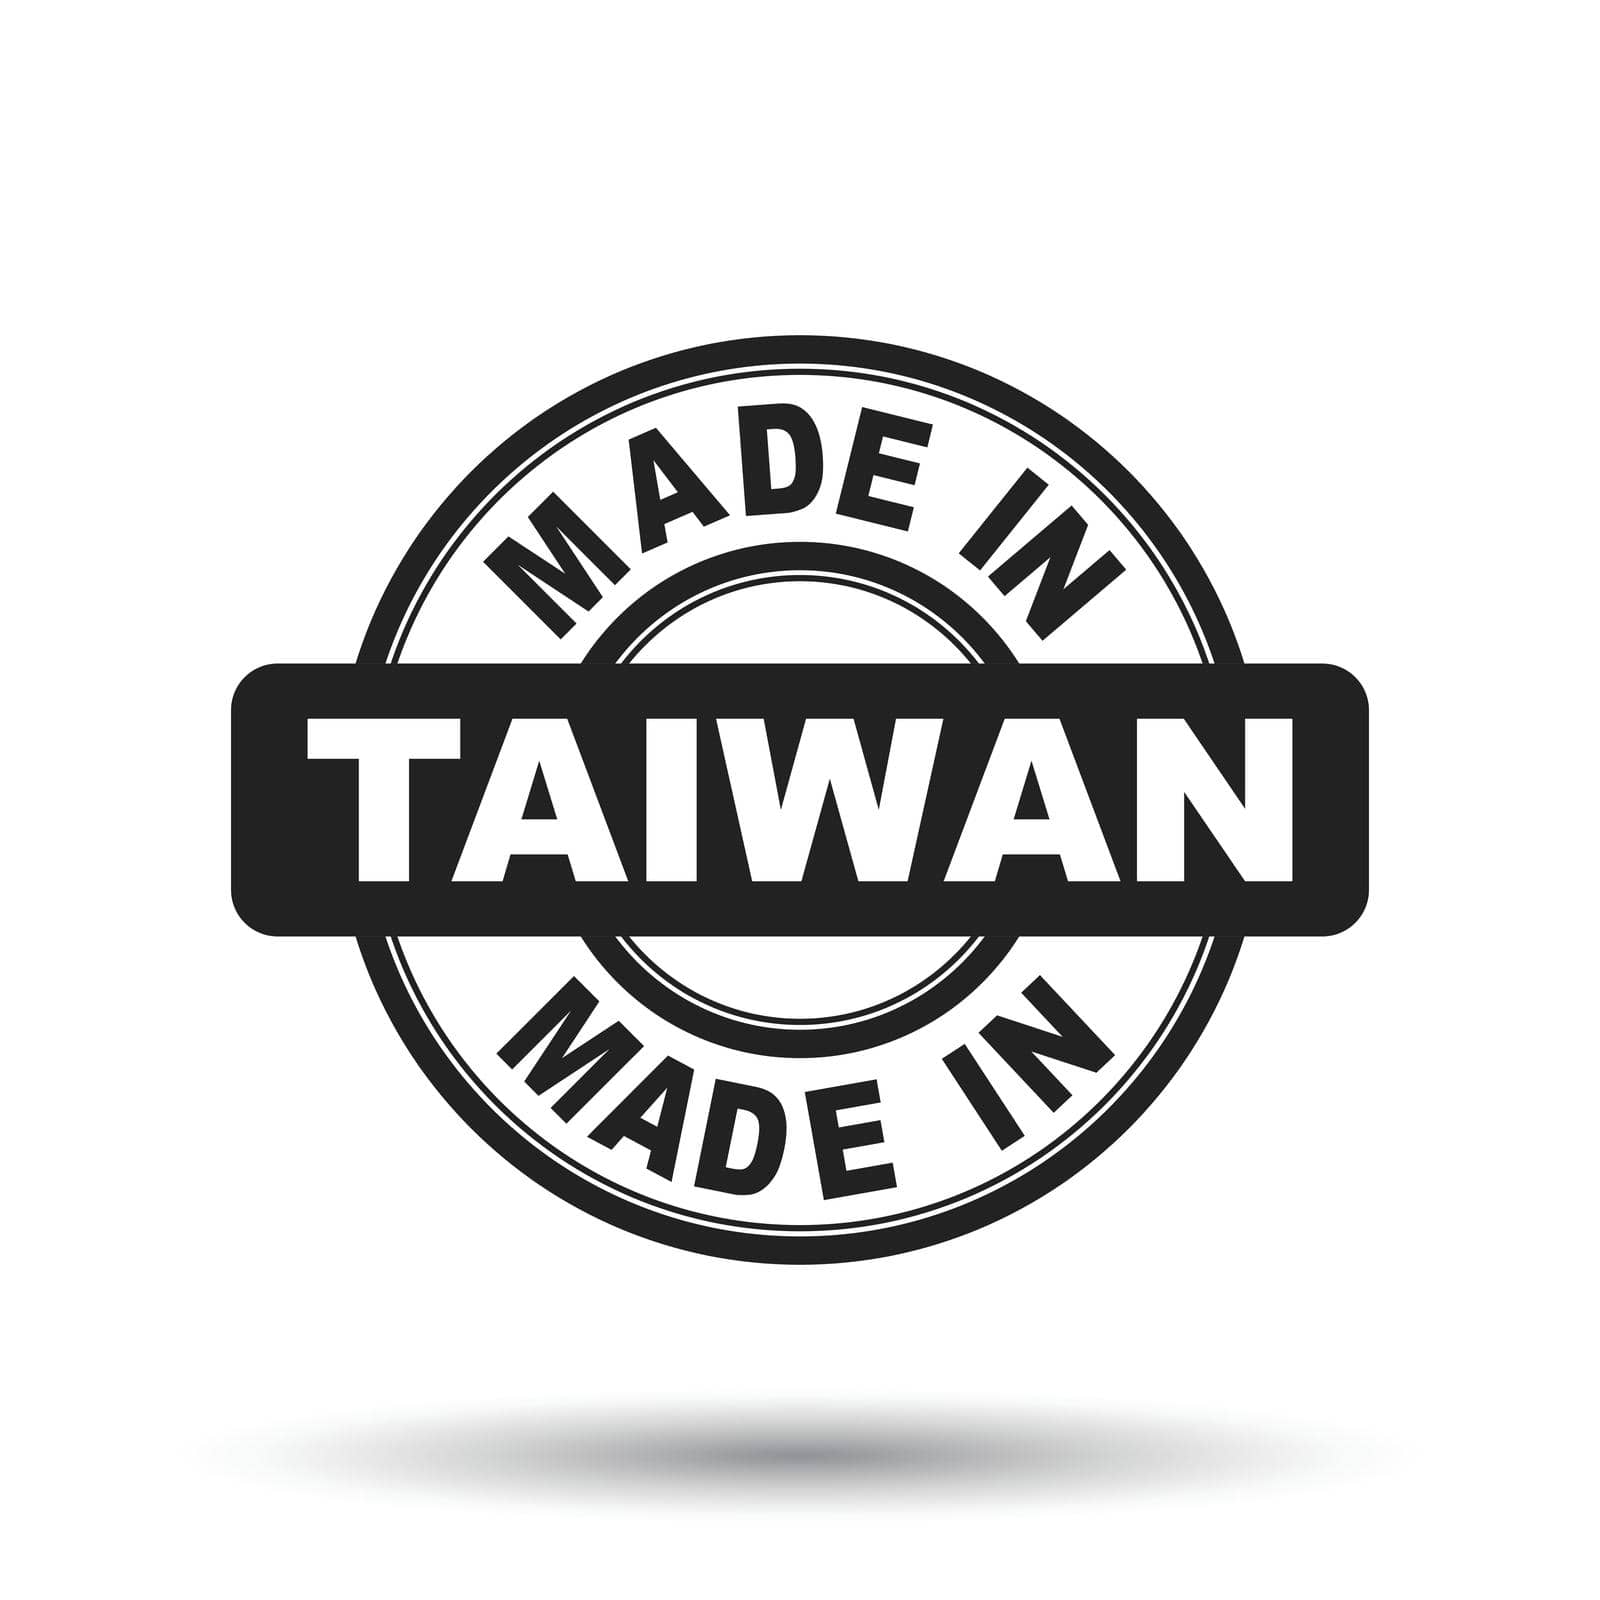 Made in Taiwan black stamp. Vector illustration on white background